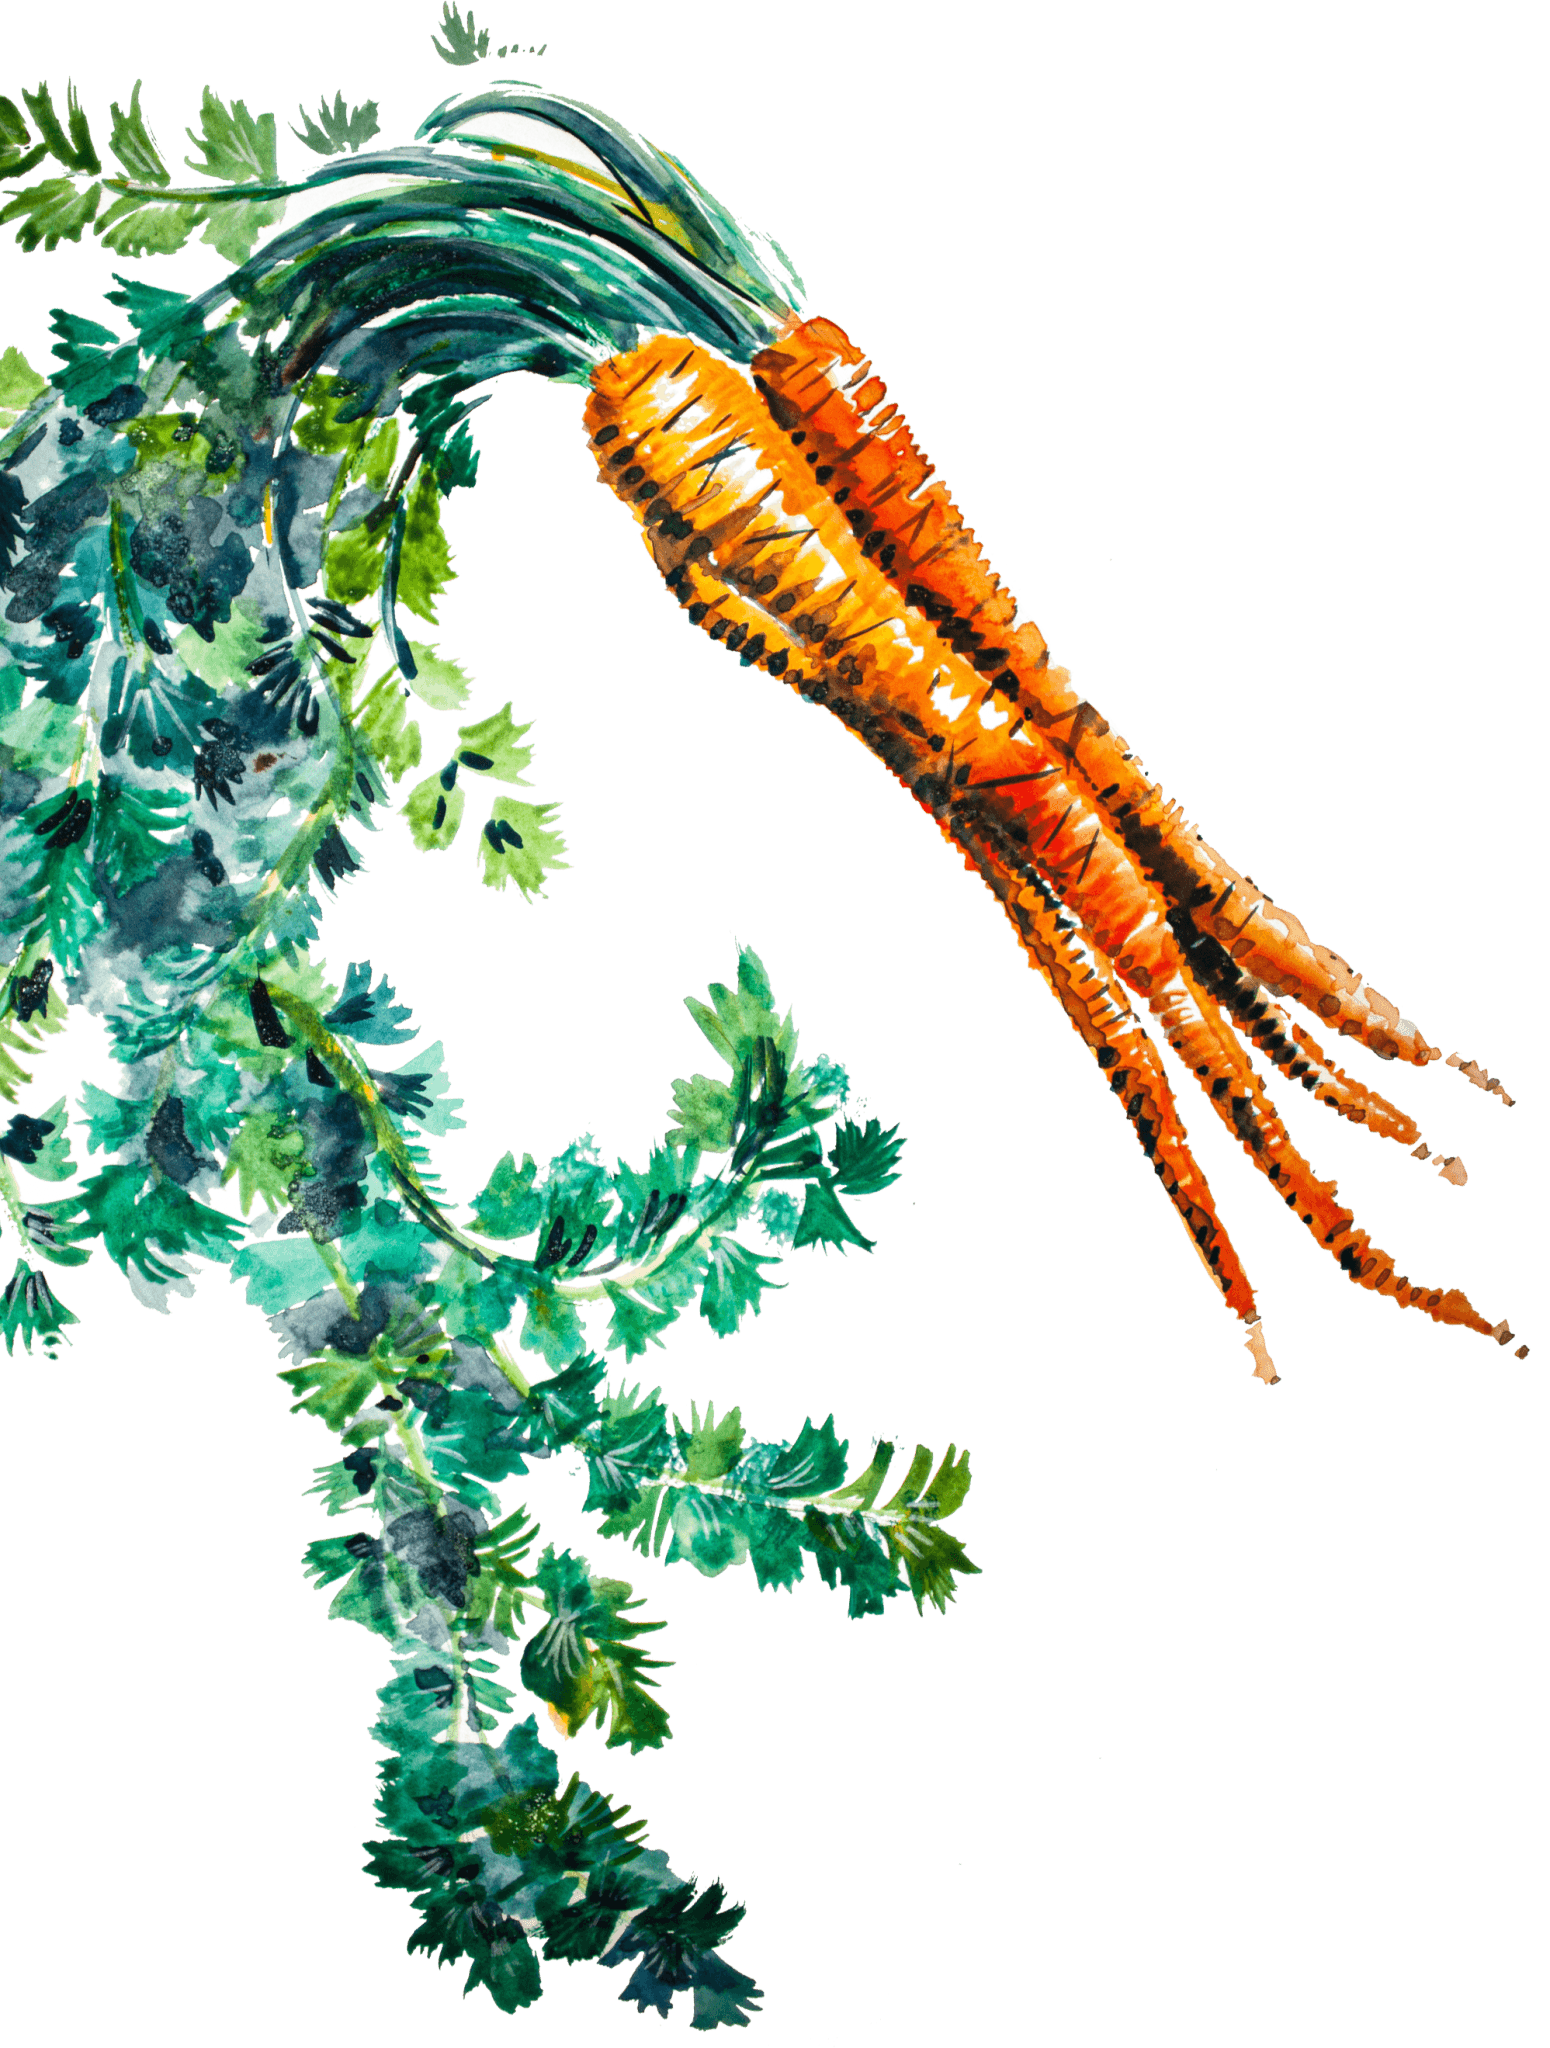 Carrot illustration with long stem of greens coming down the page.